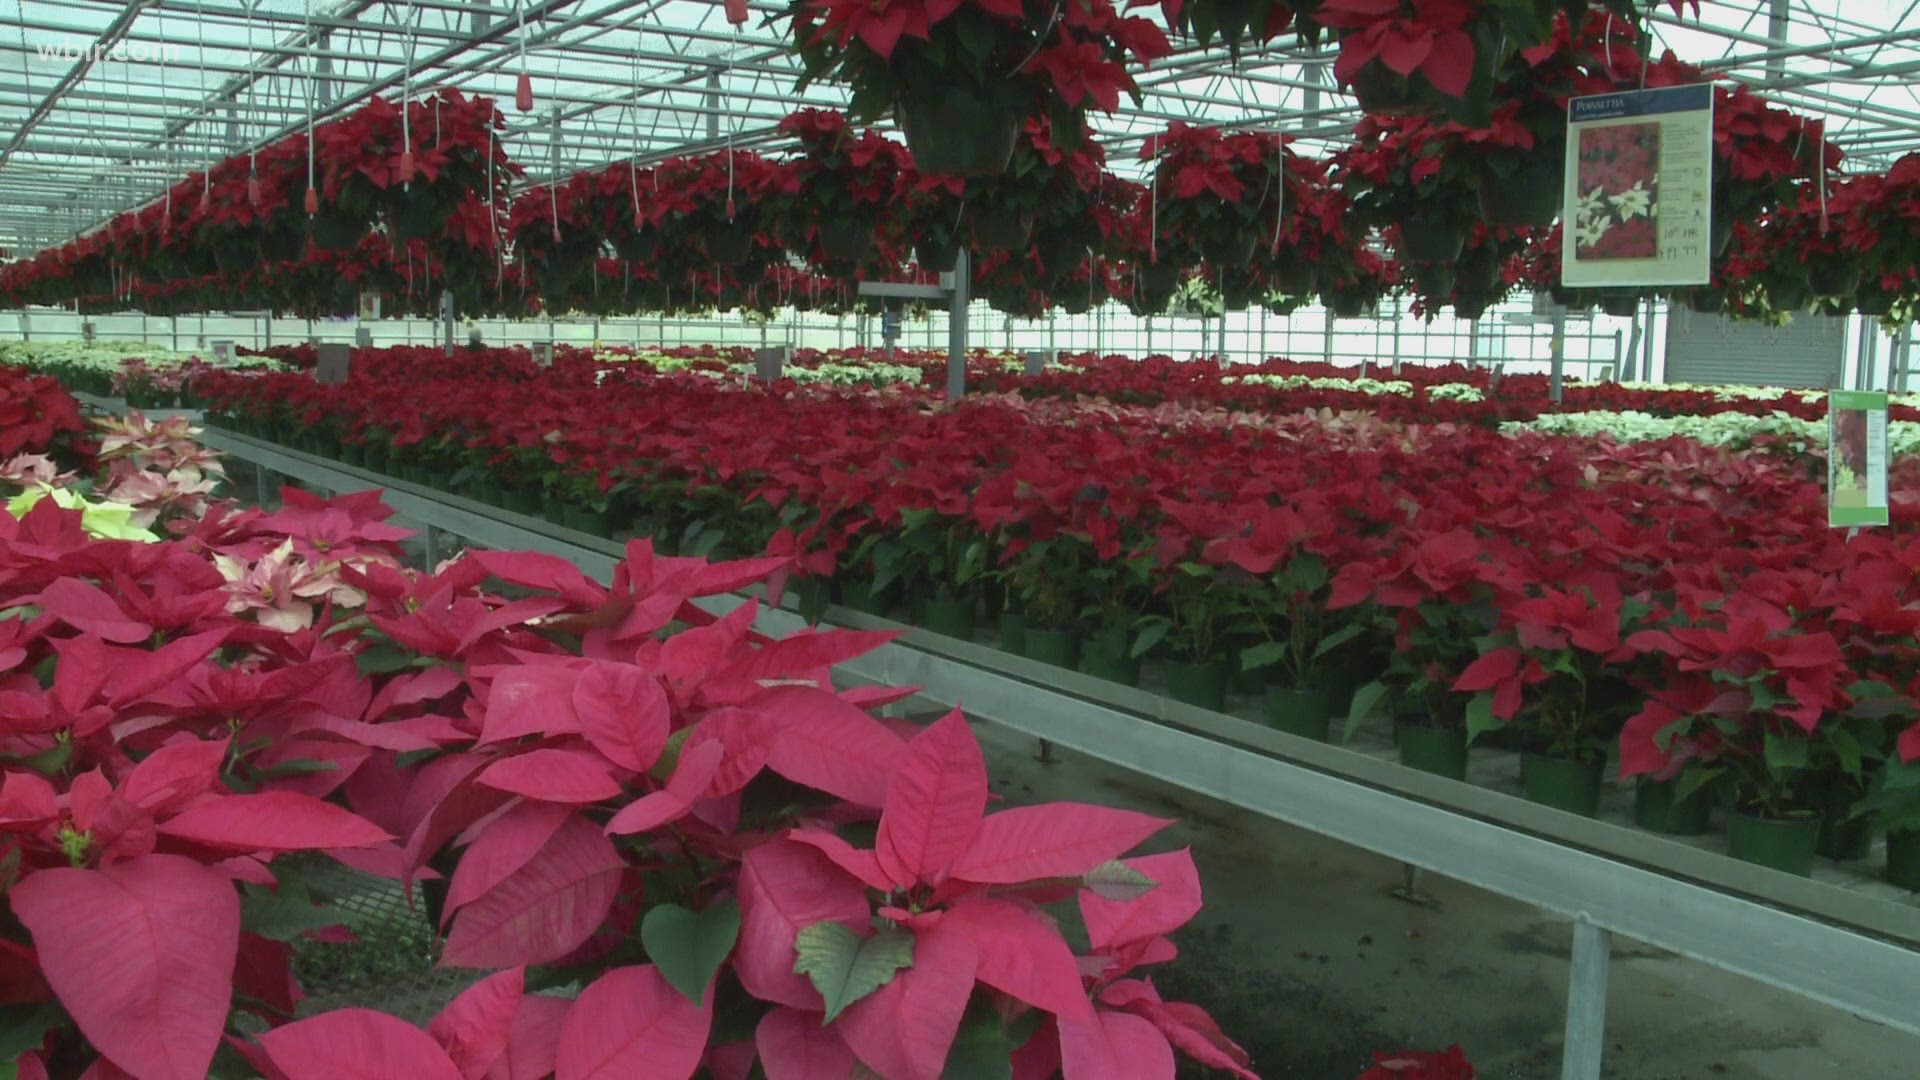 A visit with Stanley's Greenhouse taught us that we've been saying Poinsettia wrong. Dec. 7, 2020-4pm.